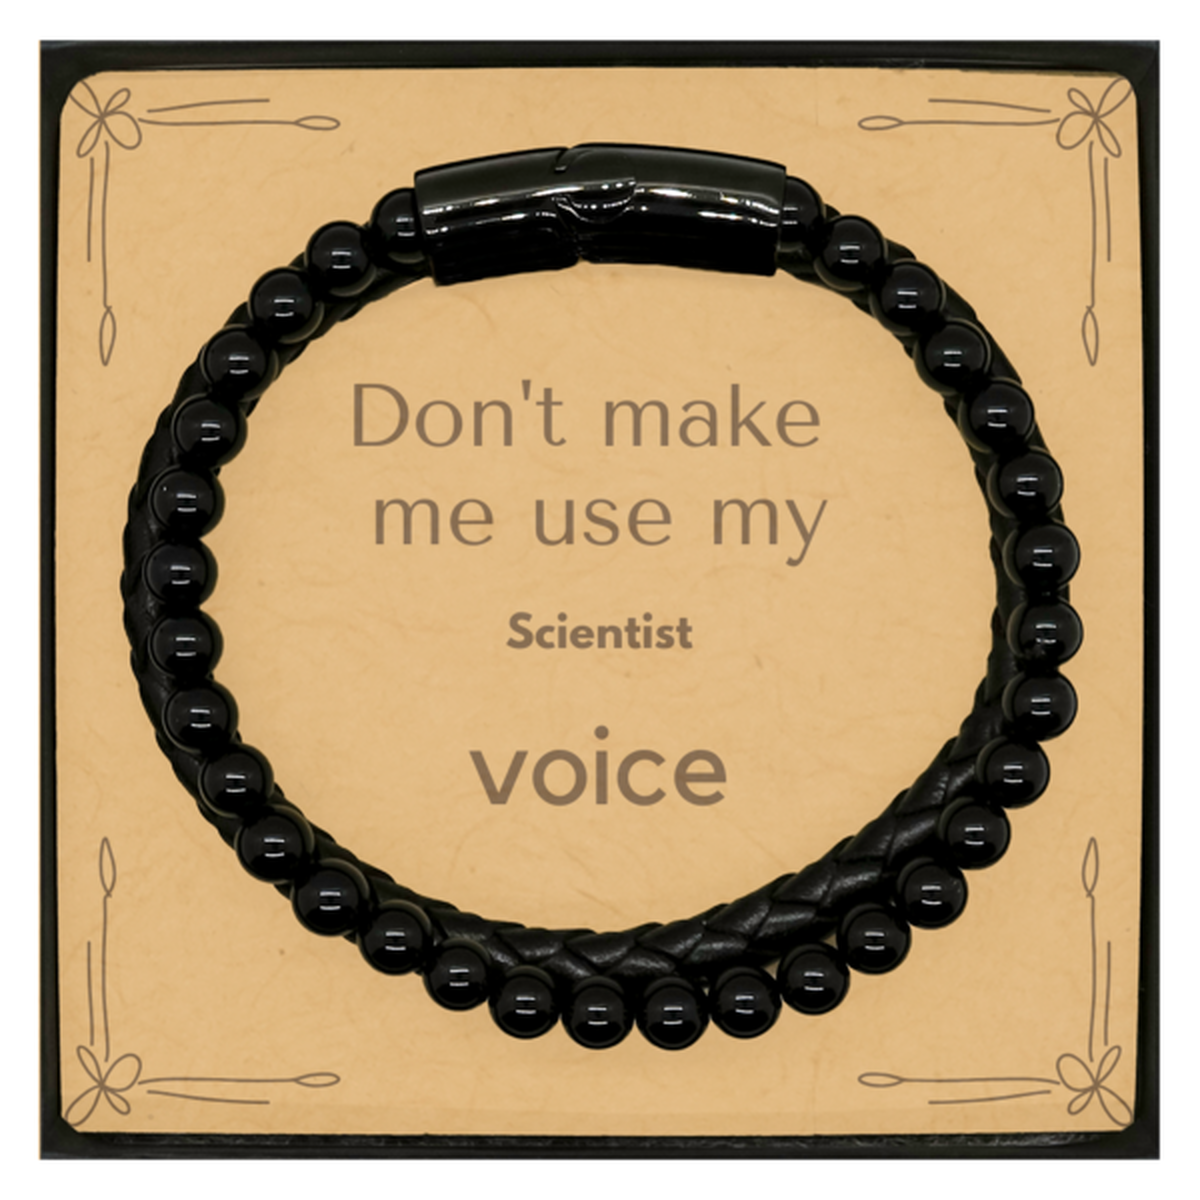 Don't make me use my Scientist voice, Sarcasm Scientist Card Gifts, Christmas Scientist Stone Leather Bracelets Birthday Unique Gifts For Scientist Coworkers, Men, Women, Colleague, Friends